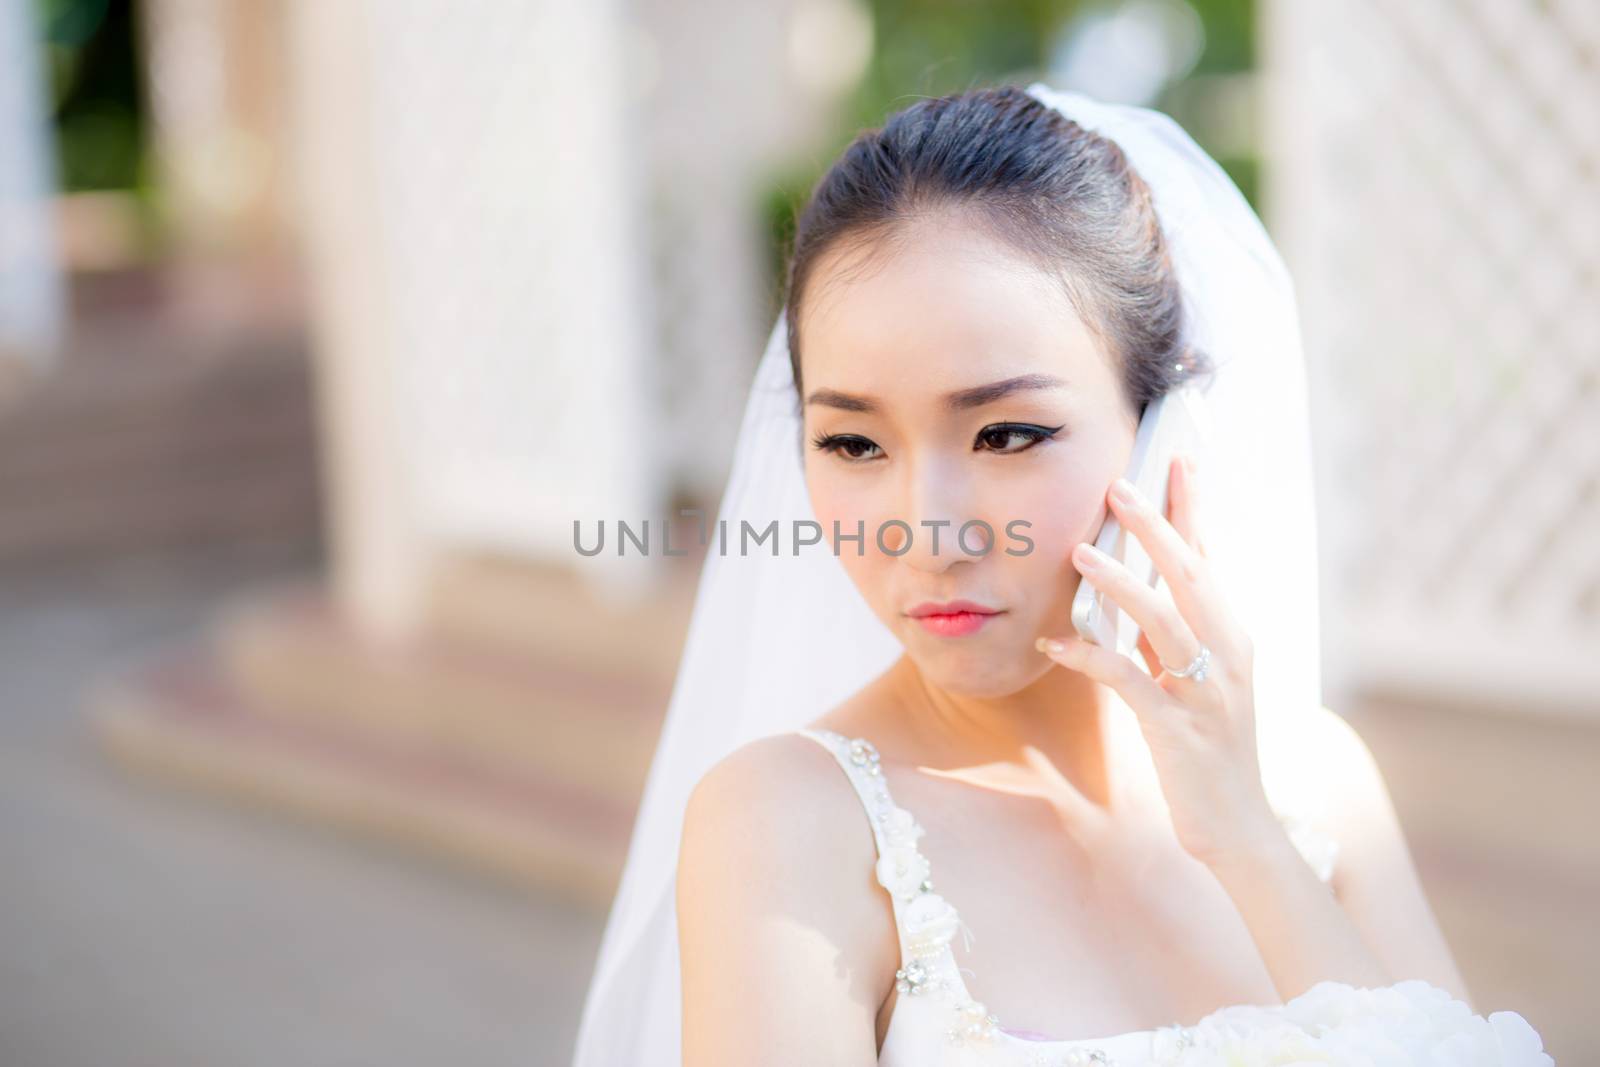 bride talking on cell phone in wedding dress